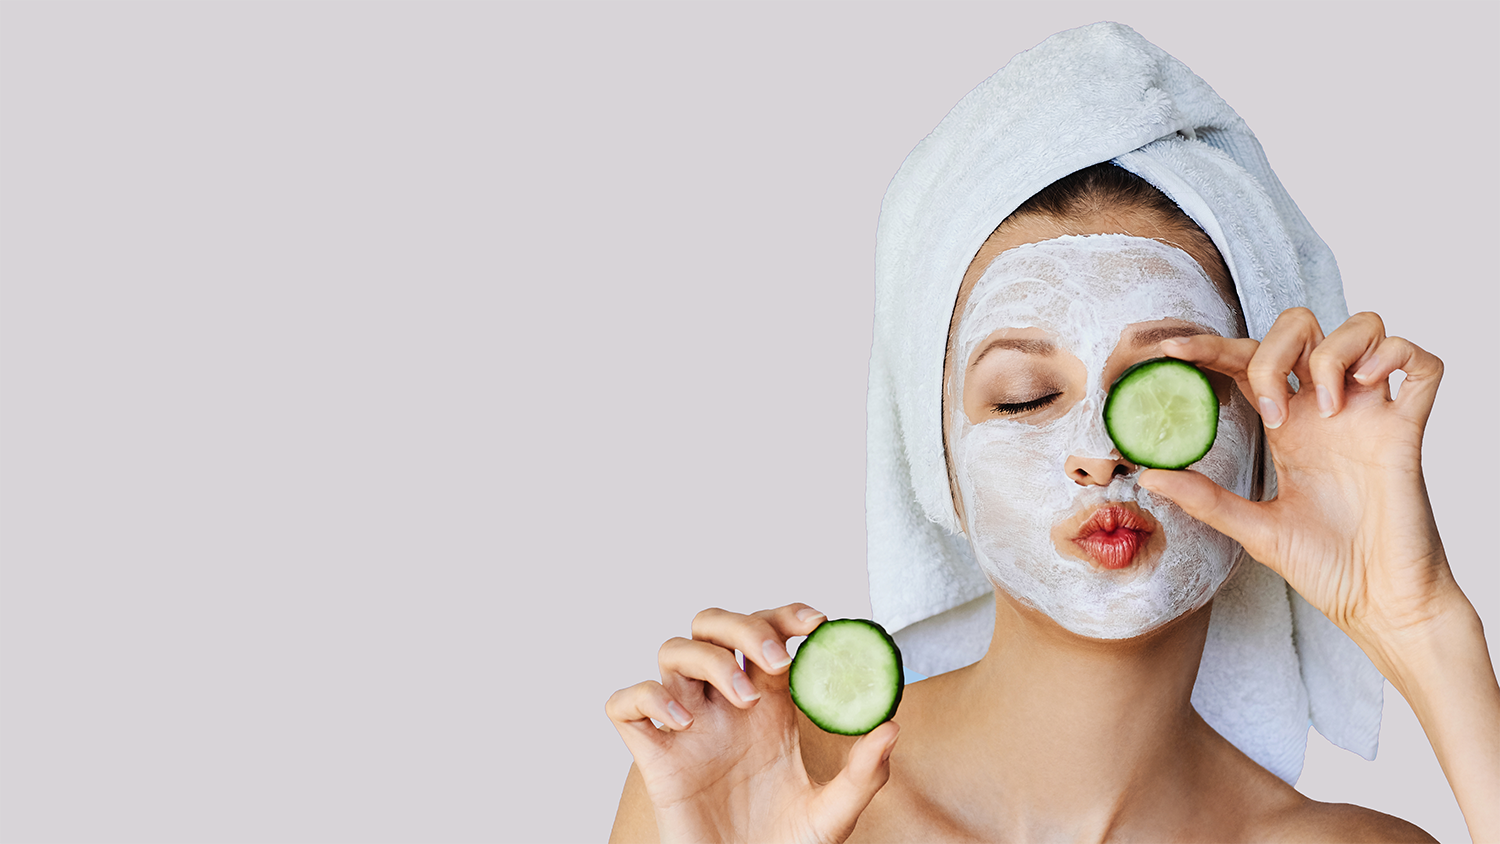 Beautiful Young Woman With Facial Mask On Her Face Holding Slices Of Cucumber